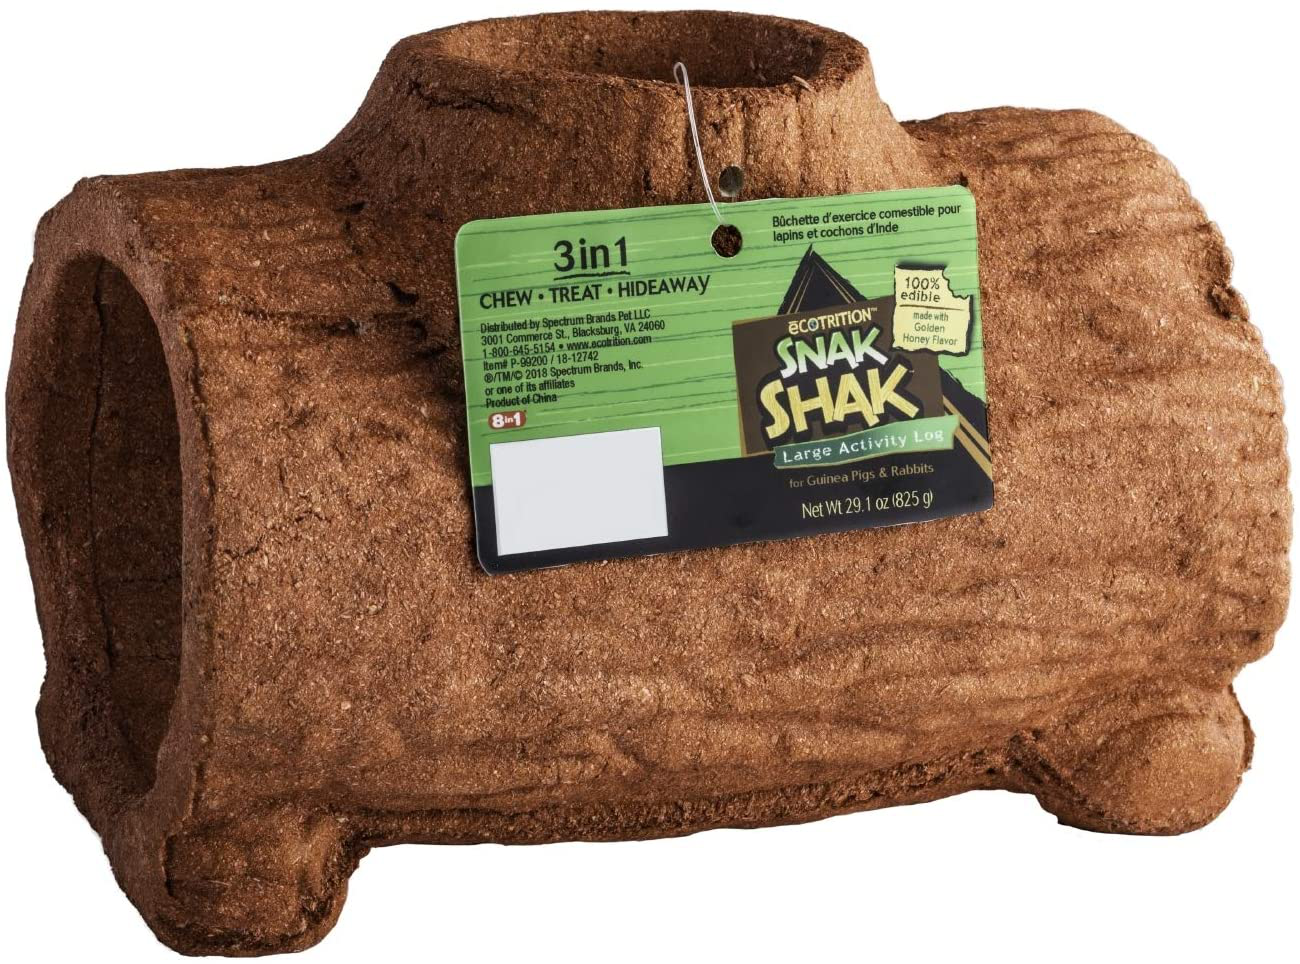 Ecotrition Snak Shak Edible Hideaway for Hamsters, Gerbils, Mice and Small Animals, 3-In-1 Chew Treat and Hideaway Animals & Pet Supplies > Pet Supplies > Small Animal Supplies > Small Animal Habitat Accessories eCOTRITION activity log Large 